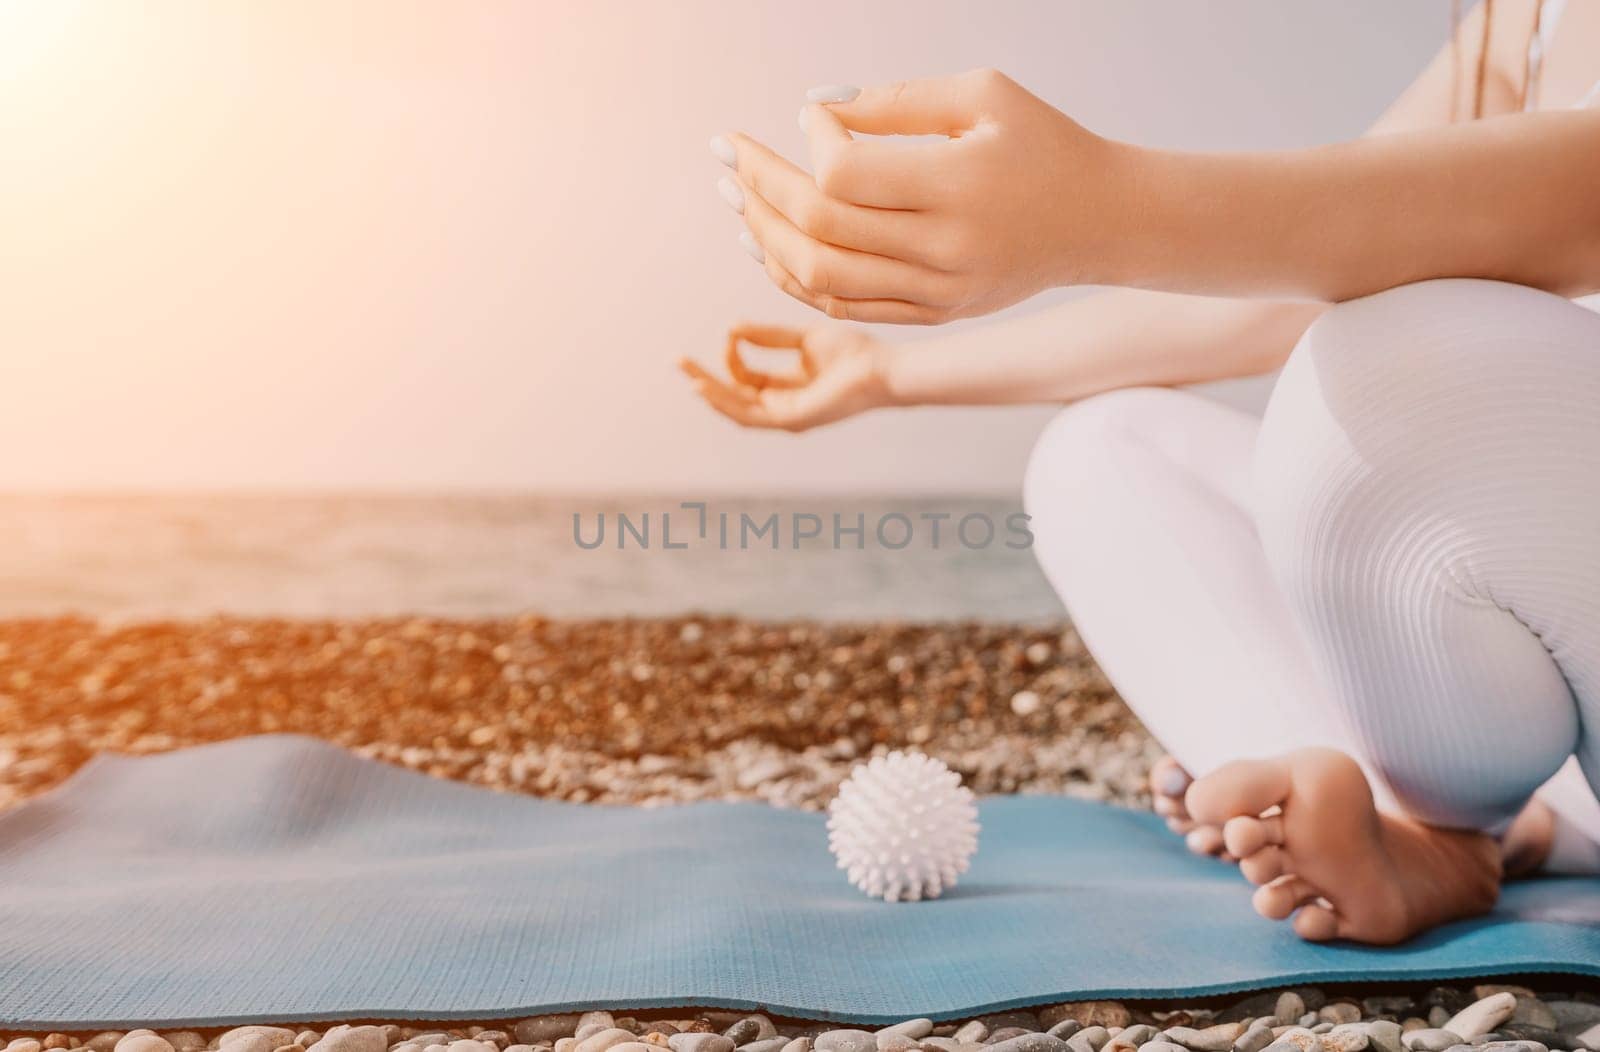 Woman yoga sea. Young woman with braids dreadlocks in white swimsuit and boho style braclets practicing outdoors on yoga mat by the ocean on sunny day. Women's yoga fitness routine. Healthy lifestyle, harmony